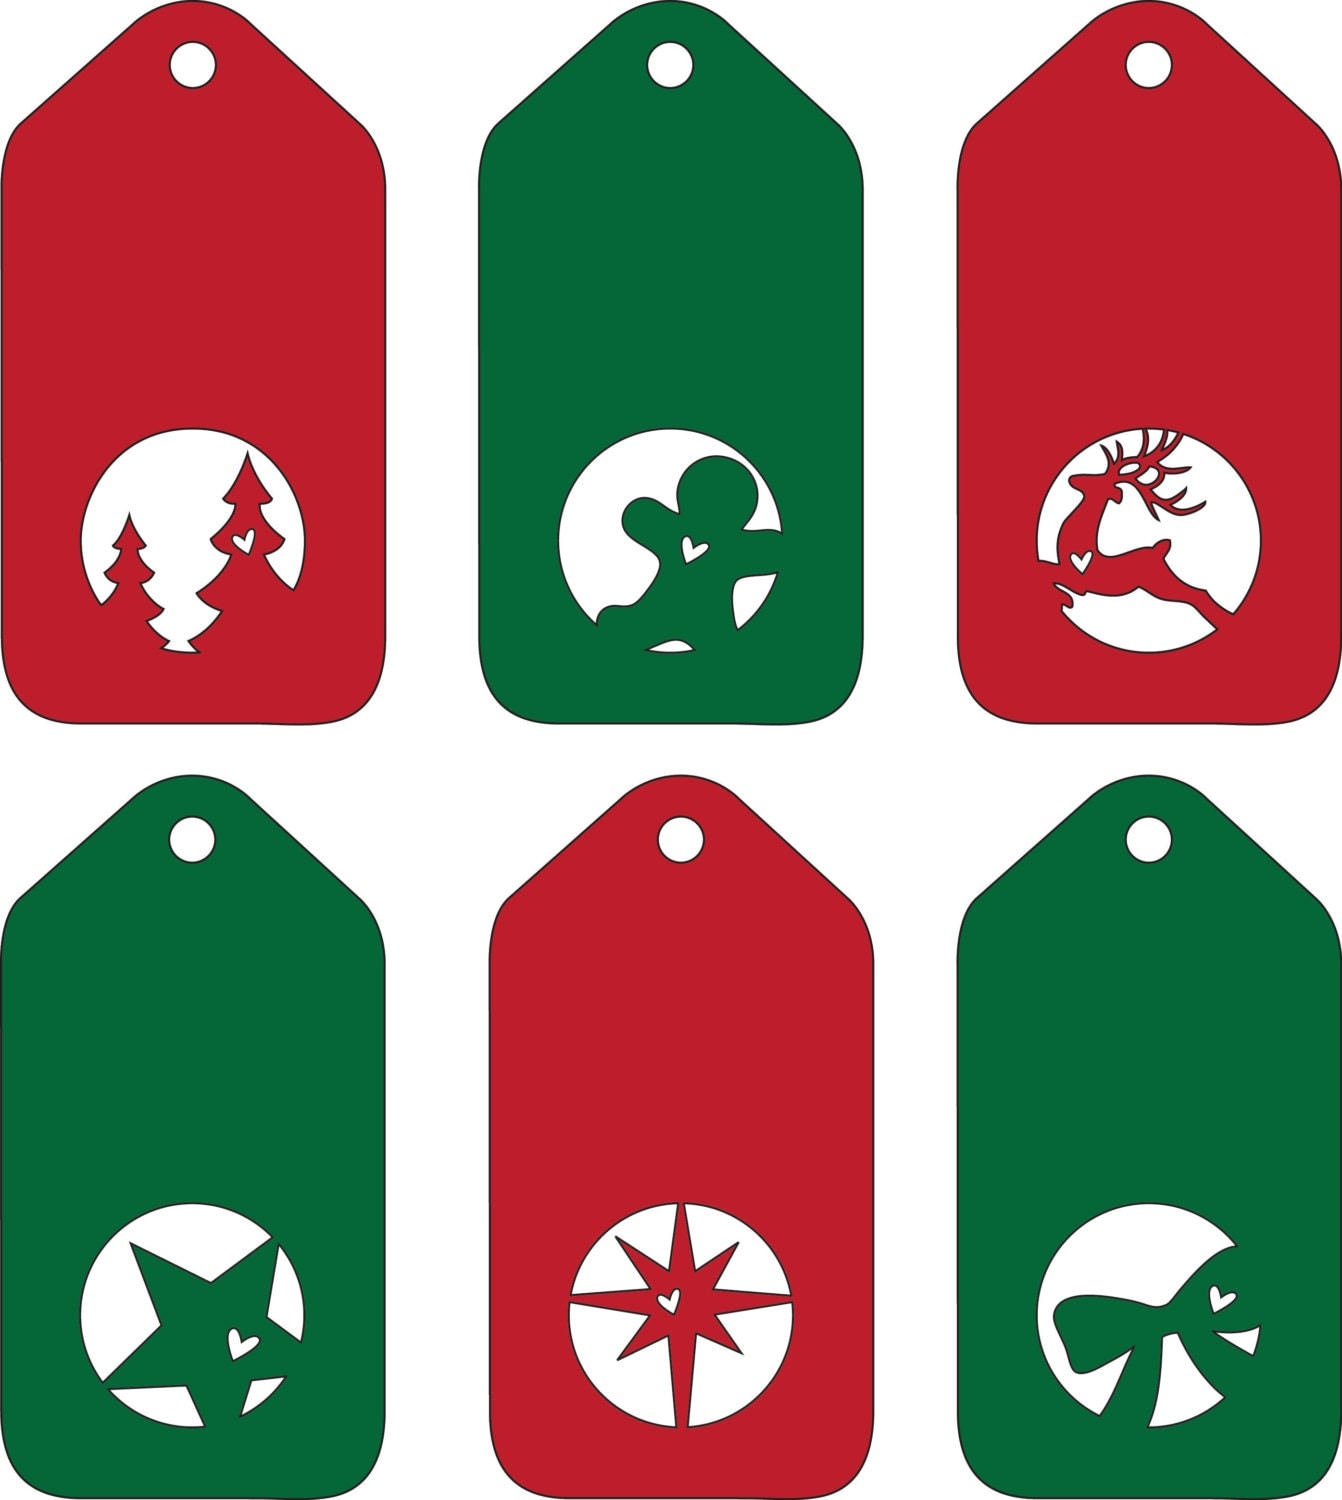 Gift Tags Christmas svg or dxf file by HatchWork on Etsy